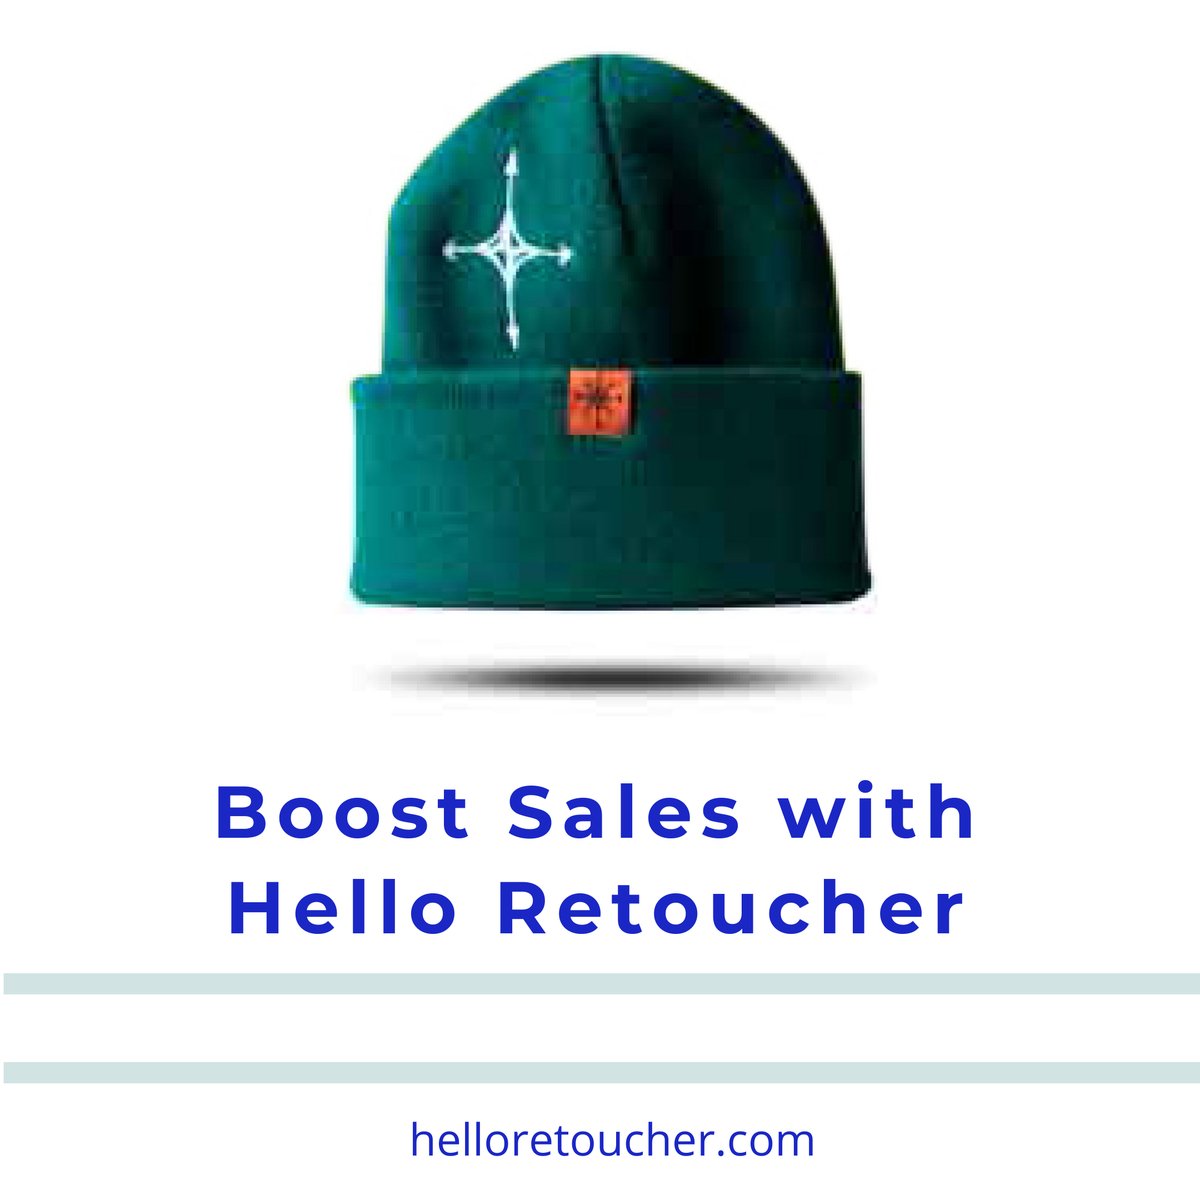 Transform your product images with Hello Retoucher's expert photo retouching services. Quick delivery, affordable pricing, and professional results guaranteed. Request a quote today! #HelloRetoucher #ProductPhotography #ProfessionalEditing #AffordablePrices